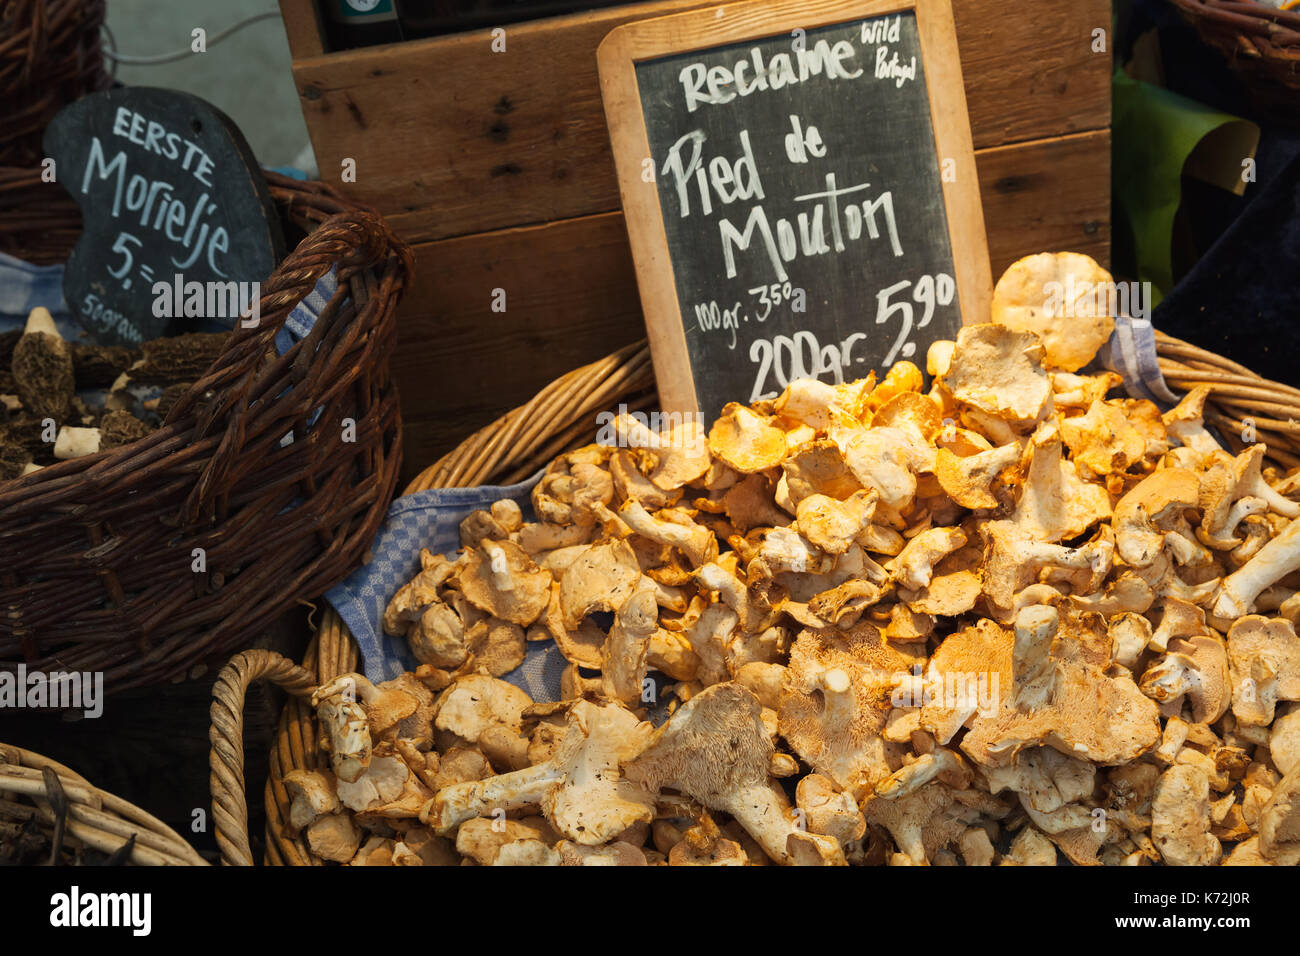 Amsterdam, Netherlands - February 25, 2017: Hedgehog mushrooms. Goods of outdoor market Noordermarkt with vendors selling an array of goods such as an Stock Photo